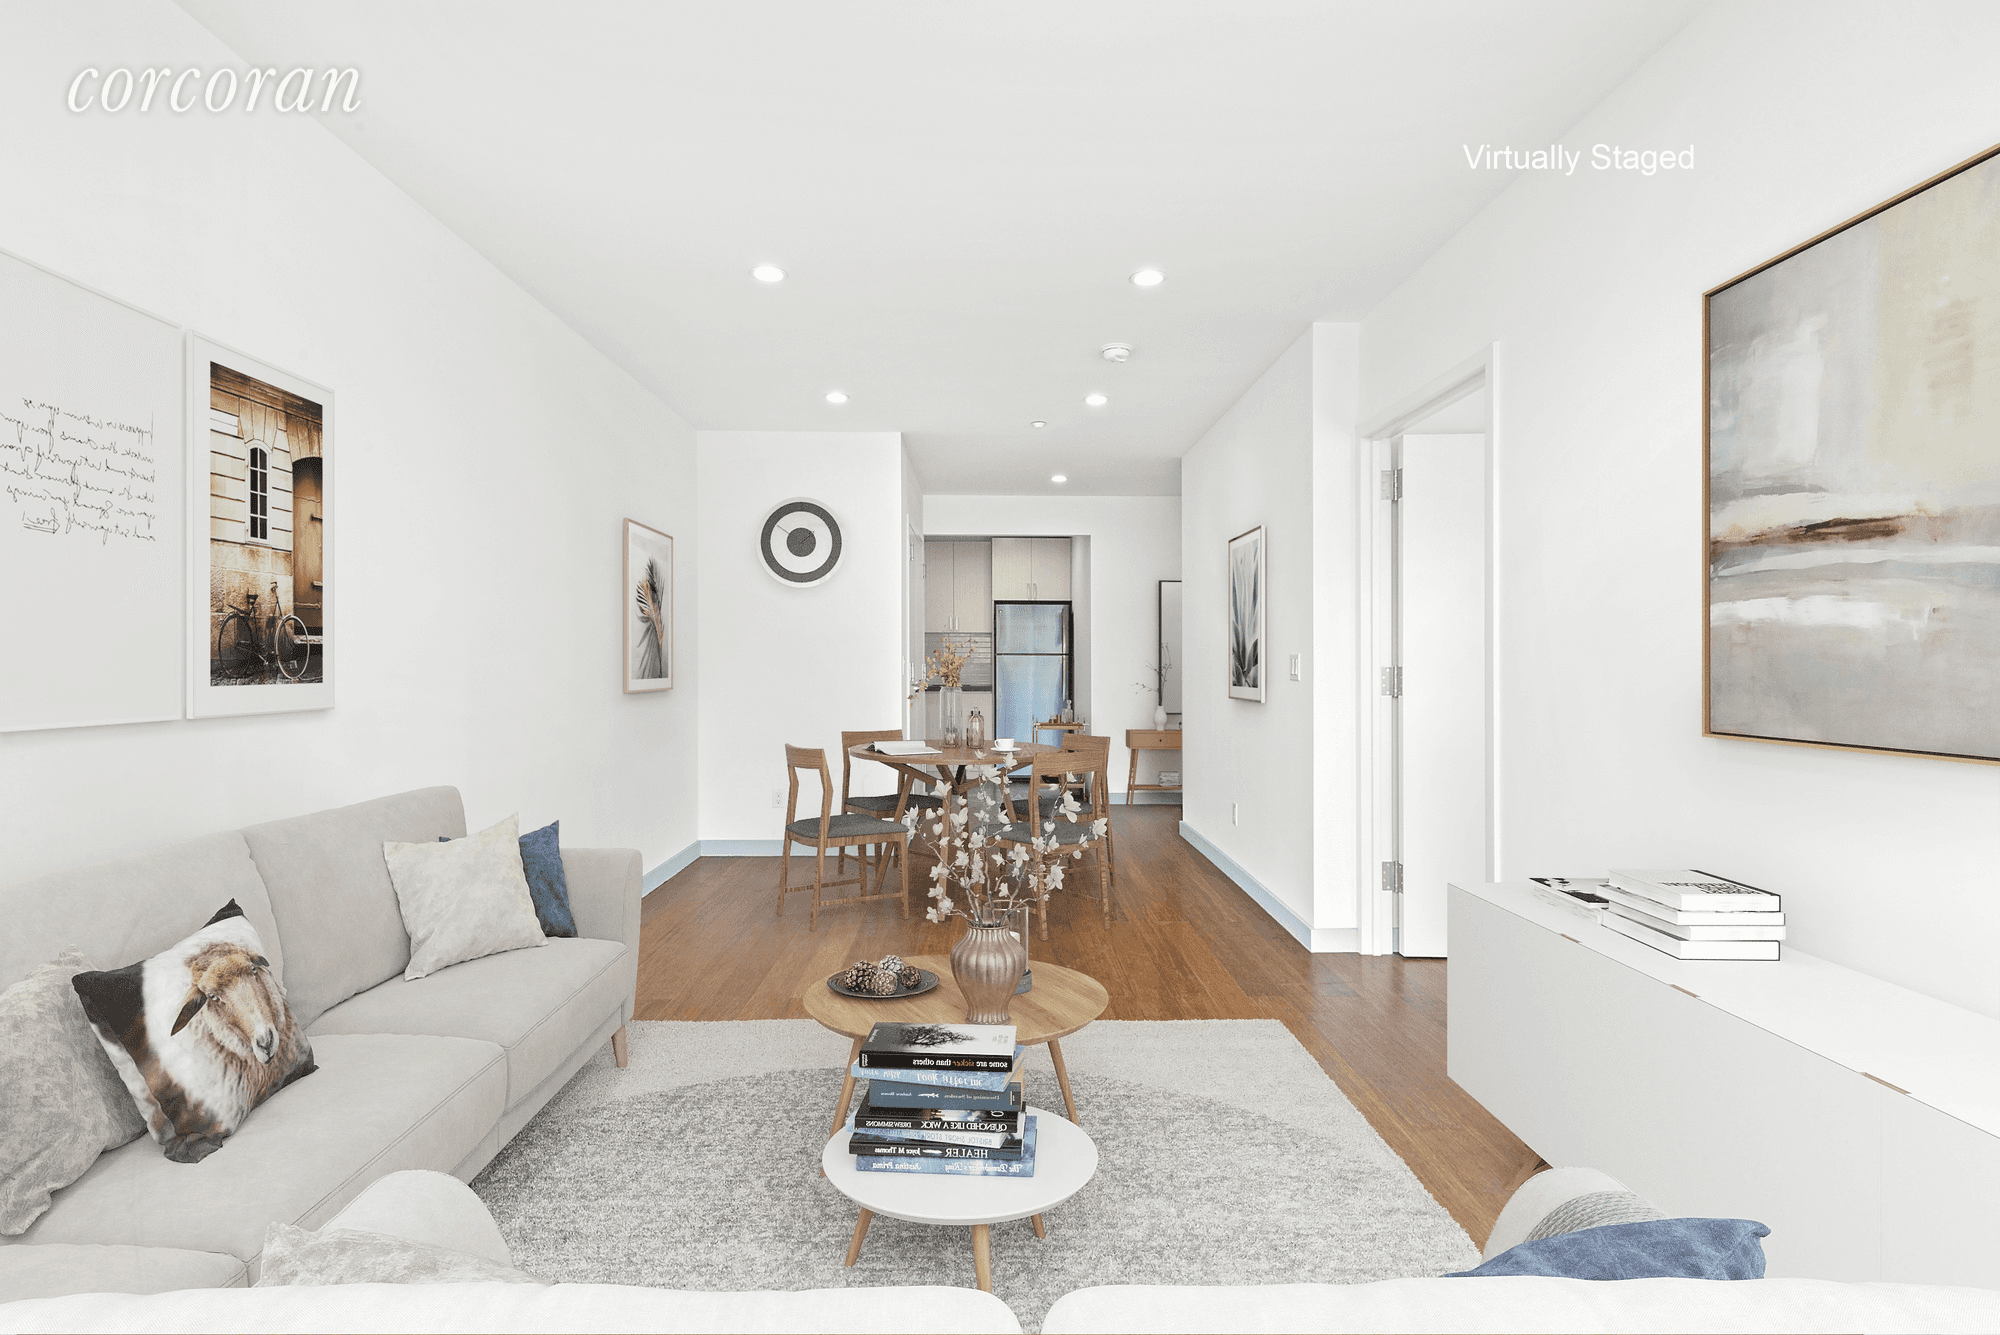 MOVE IN READY ! ONLY 4 REMAINING 4907 Fourth offers tremendous value with spacious and efficient layouts, convenient amenities, and mesmerizing waterfront views of the Statue of Liberty and city ...